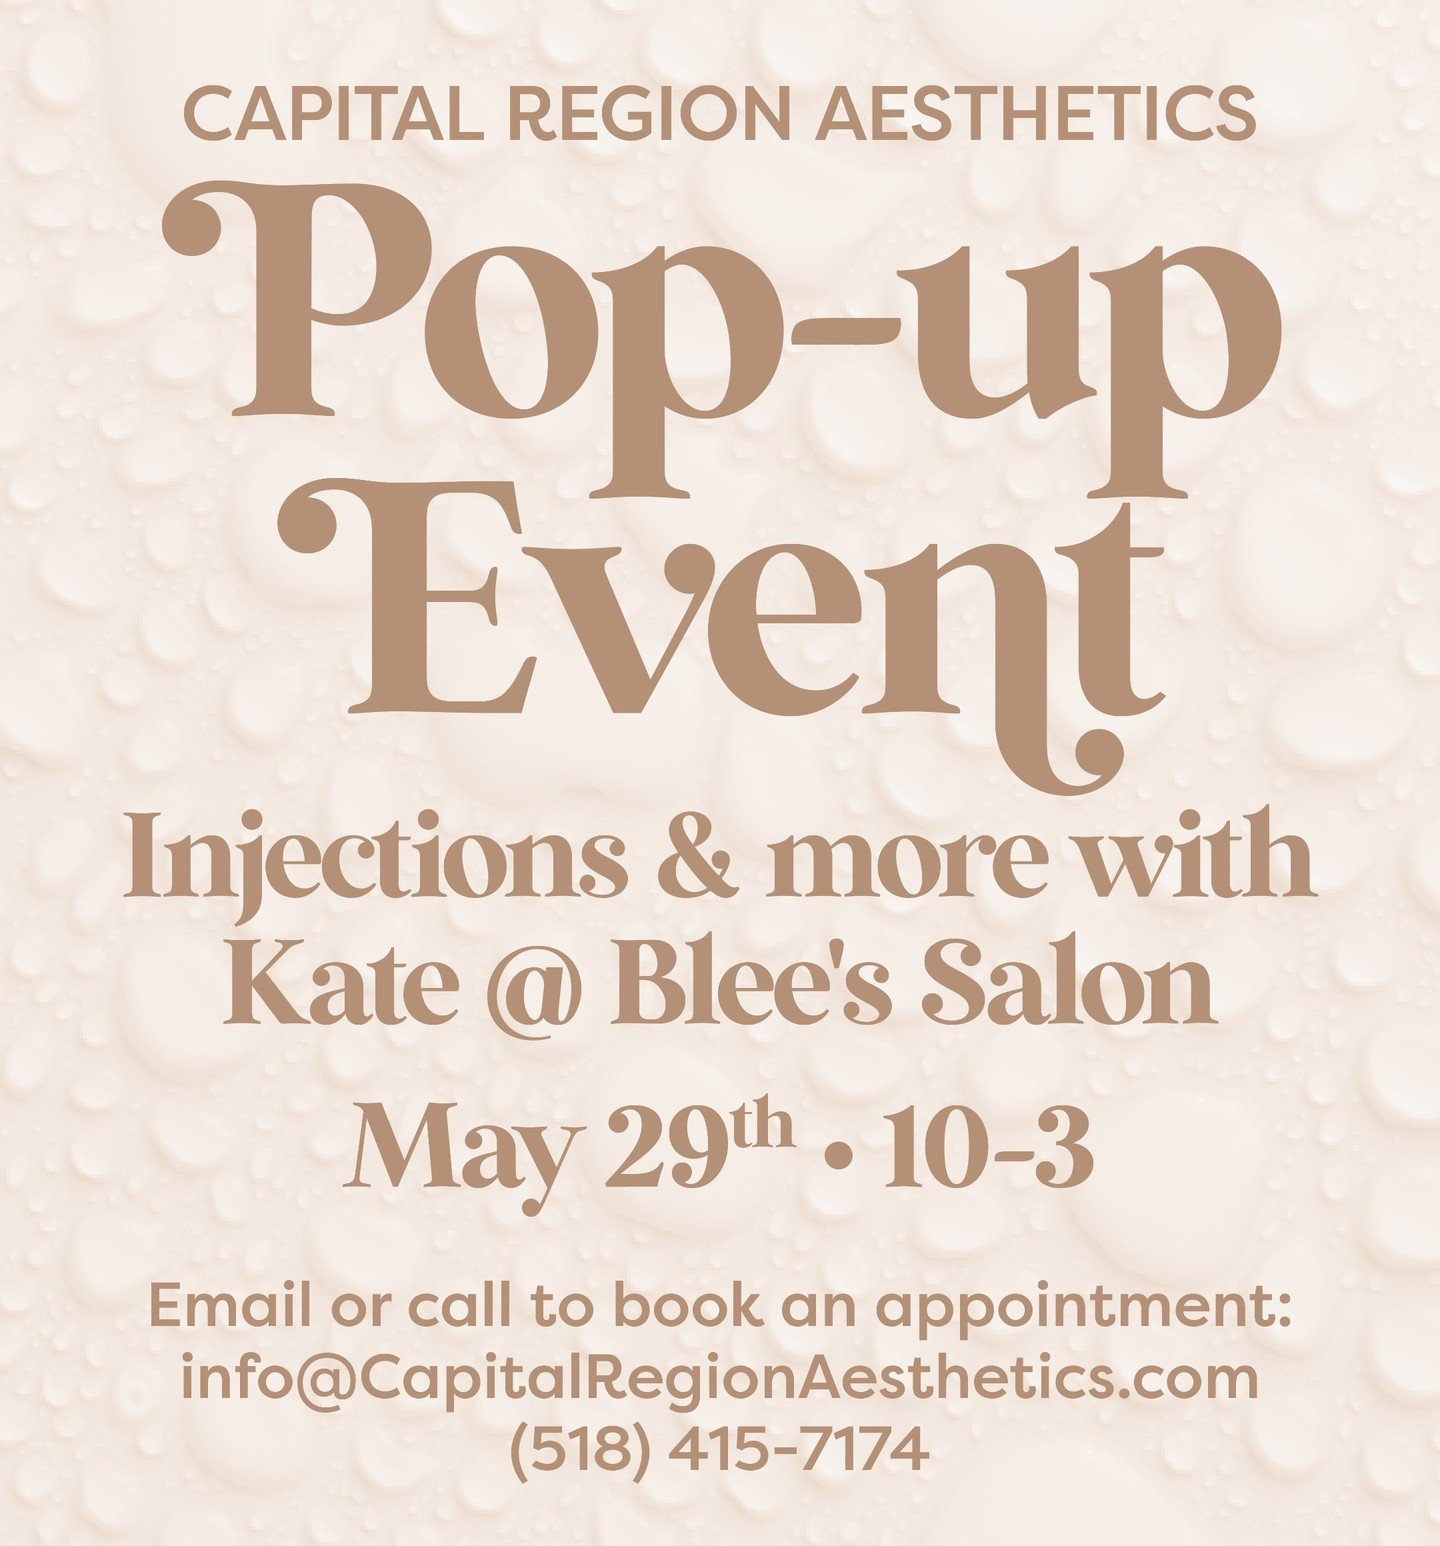 Book your Botox and Filler appointments with Kate today! 💉 She'll be back in the salon on May 29th. Spots are limited, call or email Kate to make an appointment!